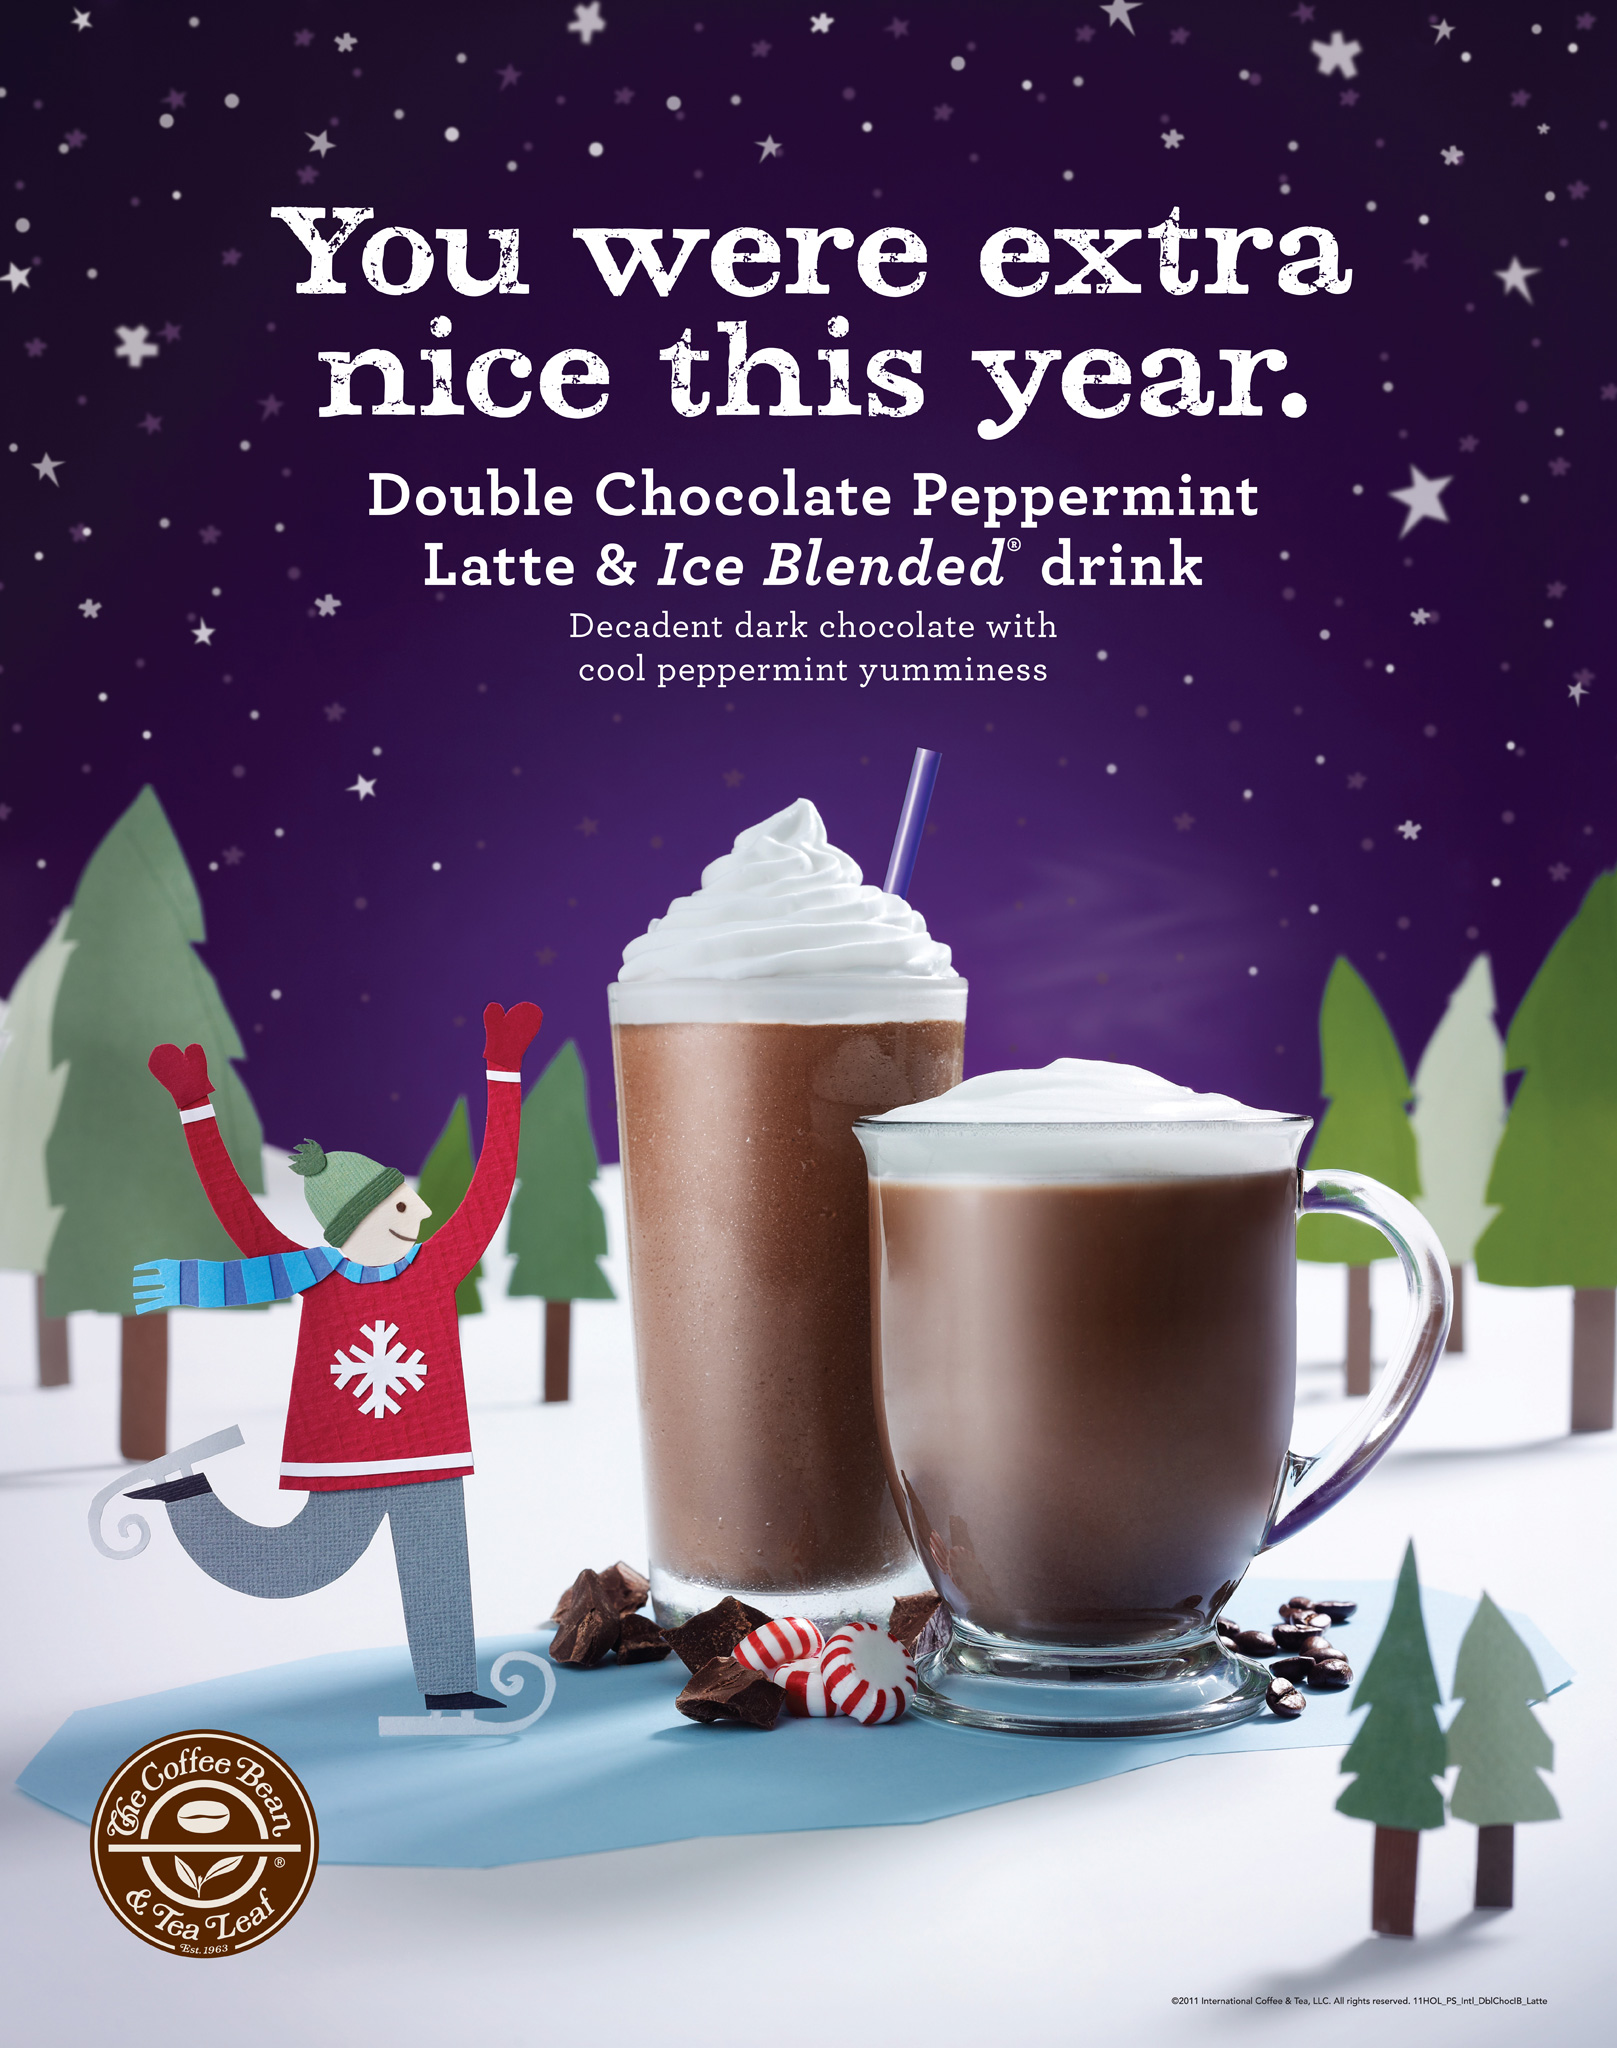 coffee bean and tea leaf holiday double chocolate peppermint in layout.jpg